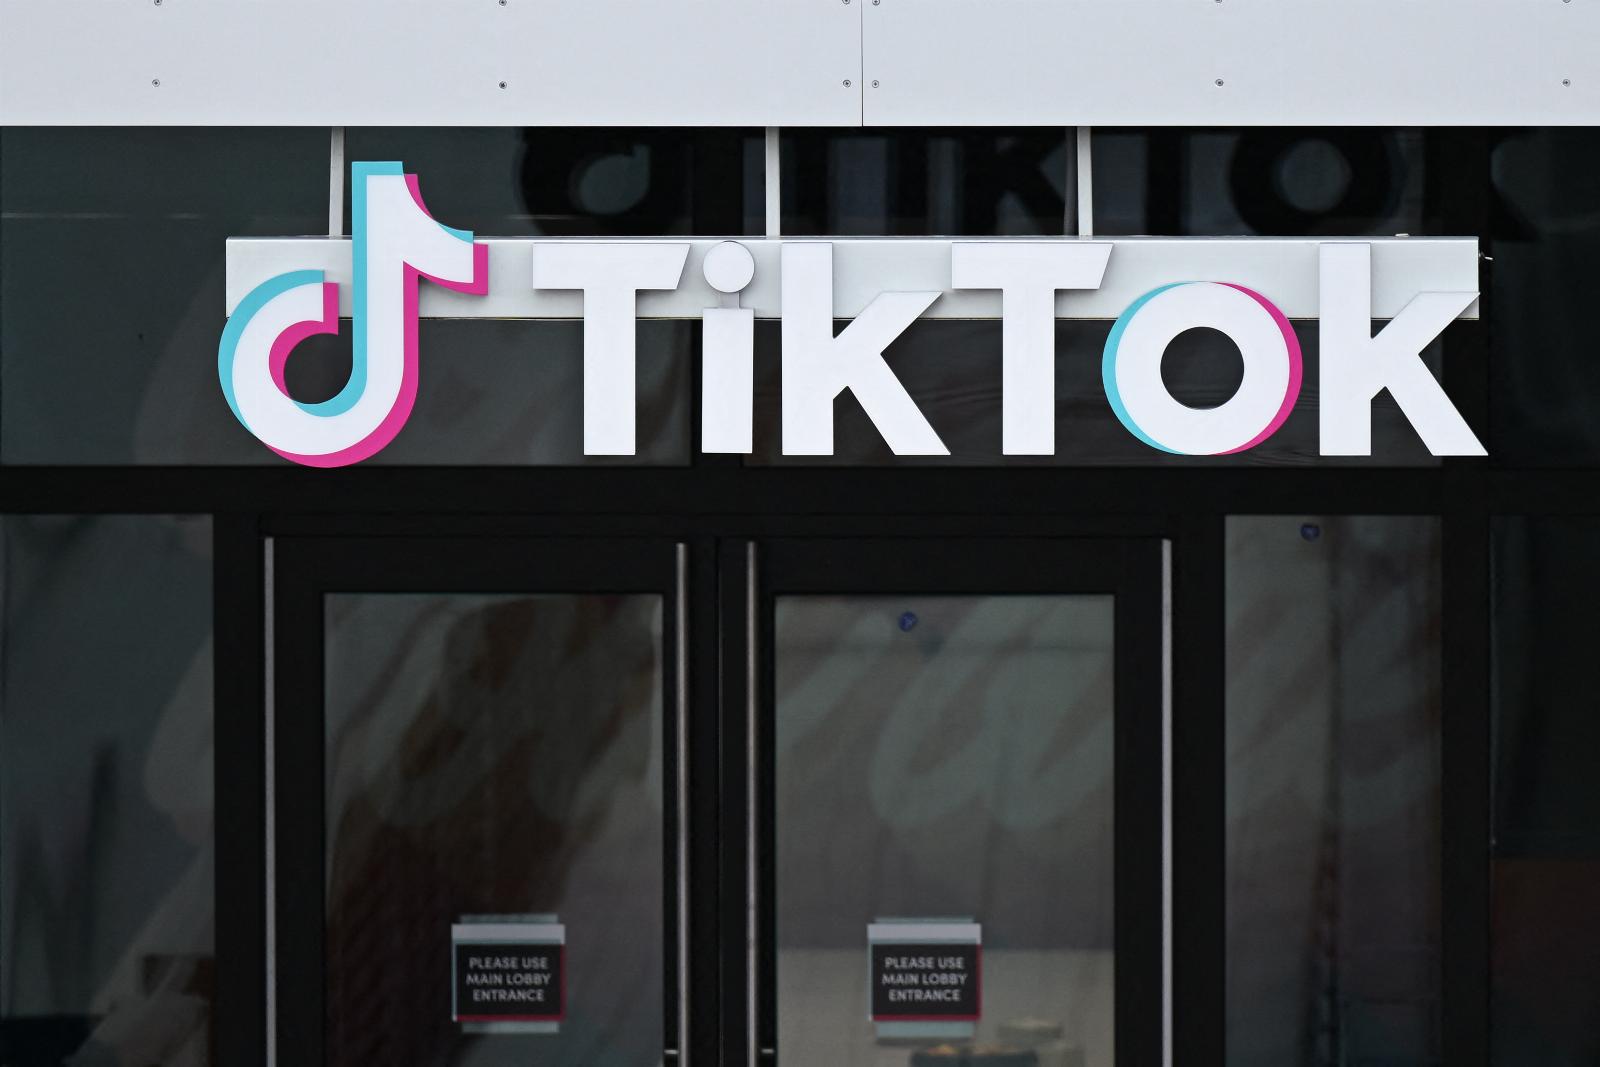 TikTok launches a music streaming service in Brazil and Indonesia called ‘TikTok Music’